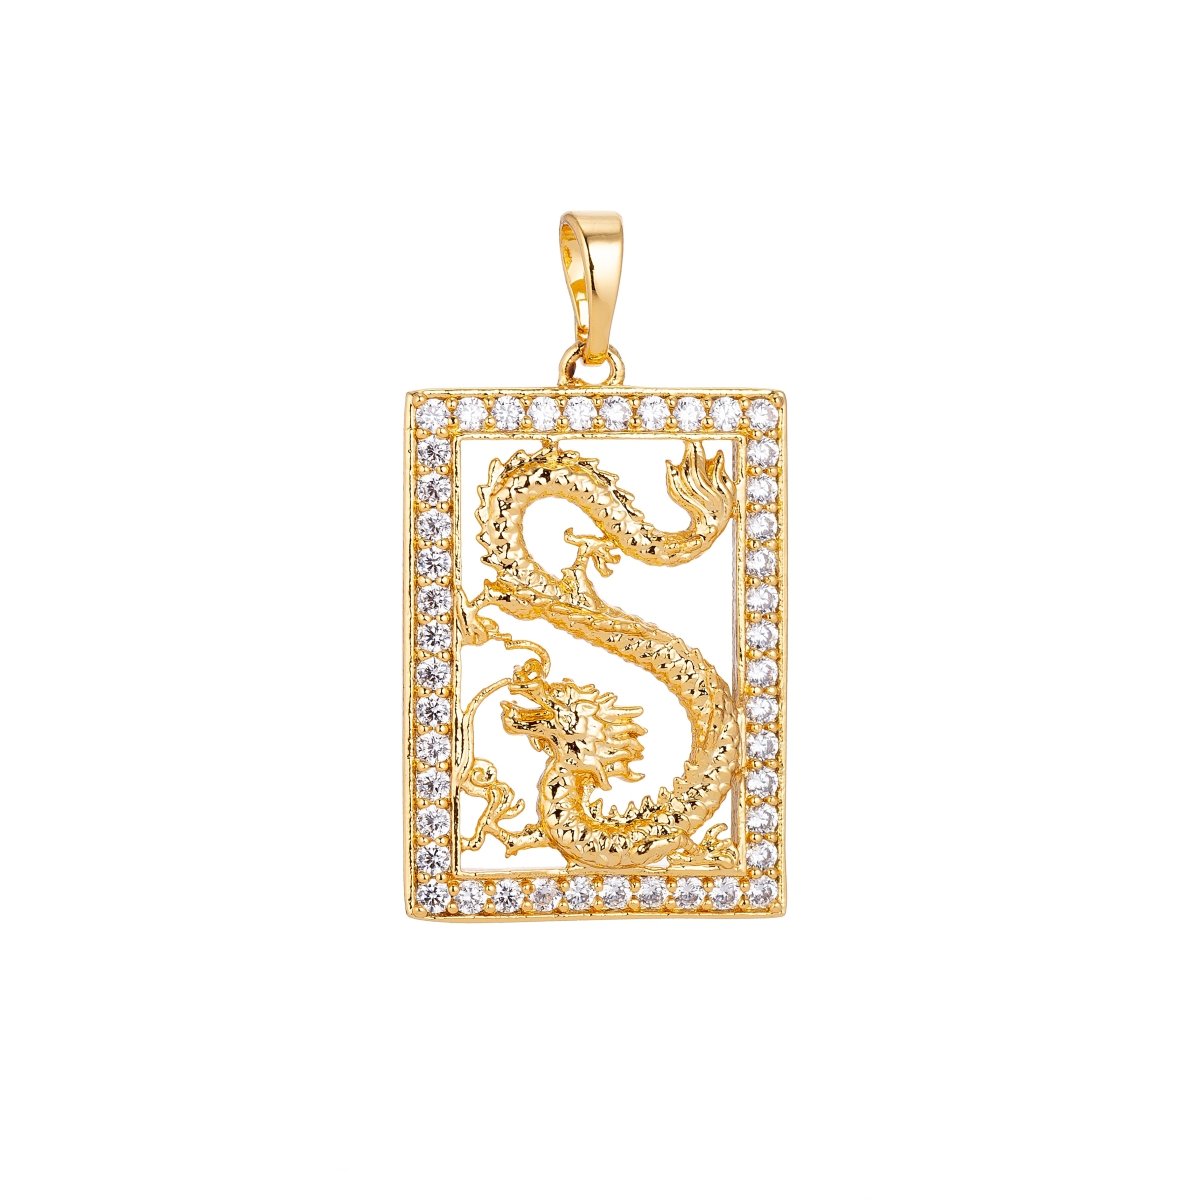 Micro Pave Gold Dragon Frame Majestic, Fairy Tale Mythical Creature tablet Necklace Pendant Charm for Jewelry Making H-633 - DLUXCA